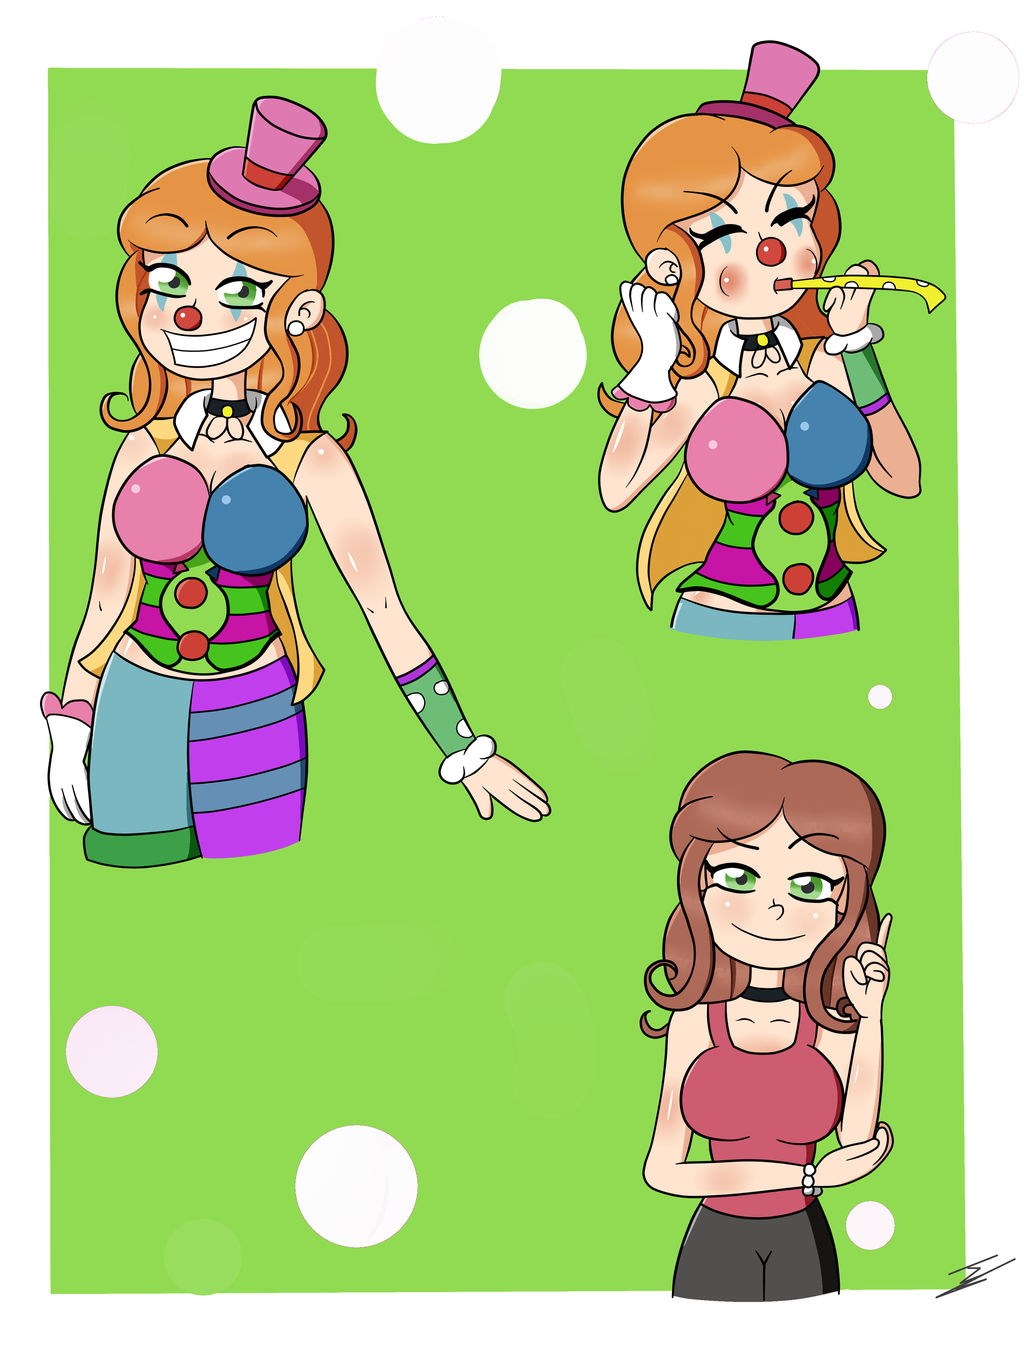 Clown Girl by Pepemay93 on DeviantArt